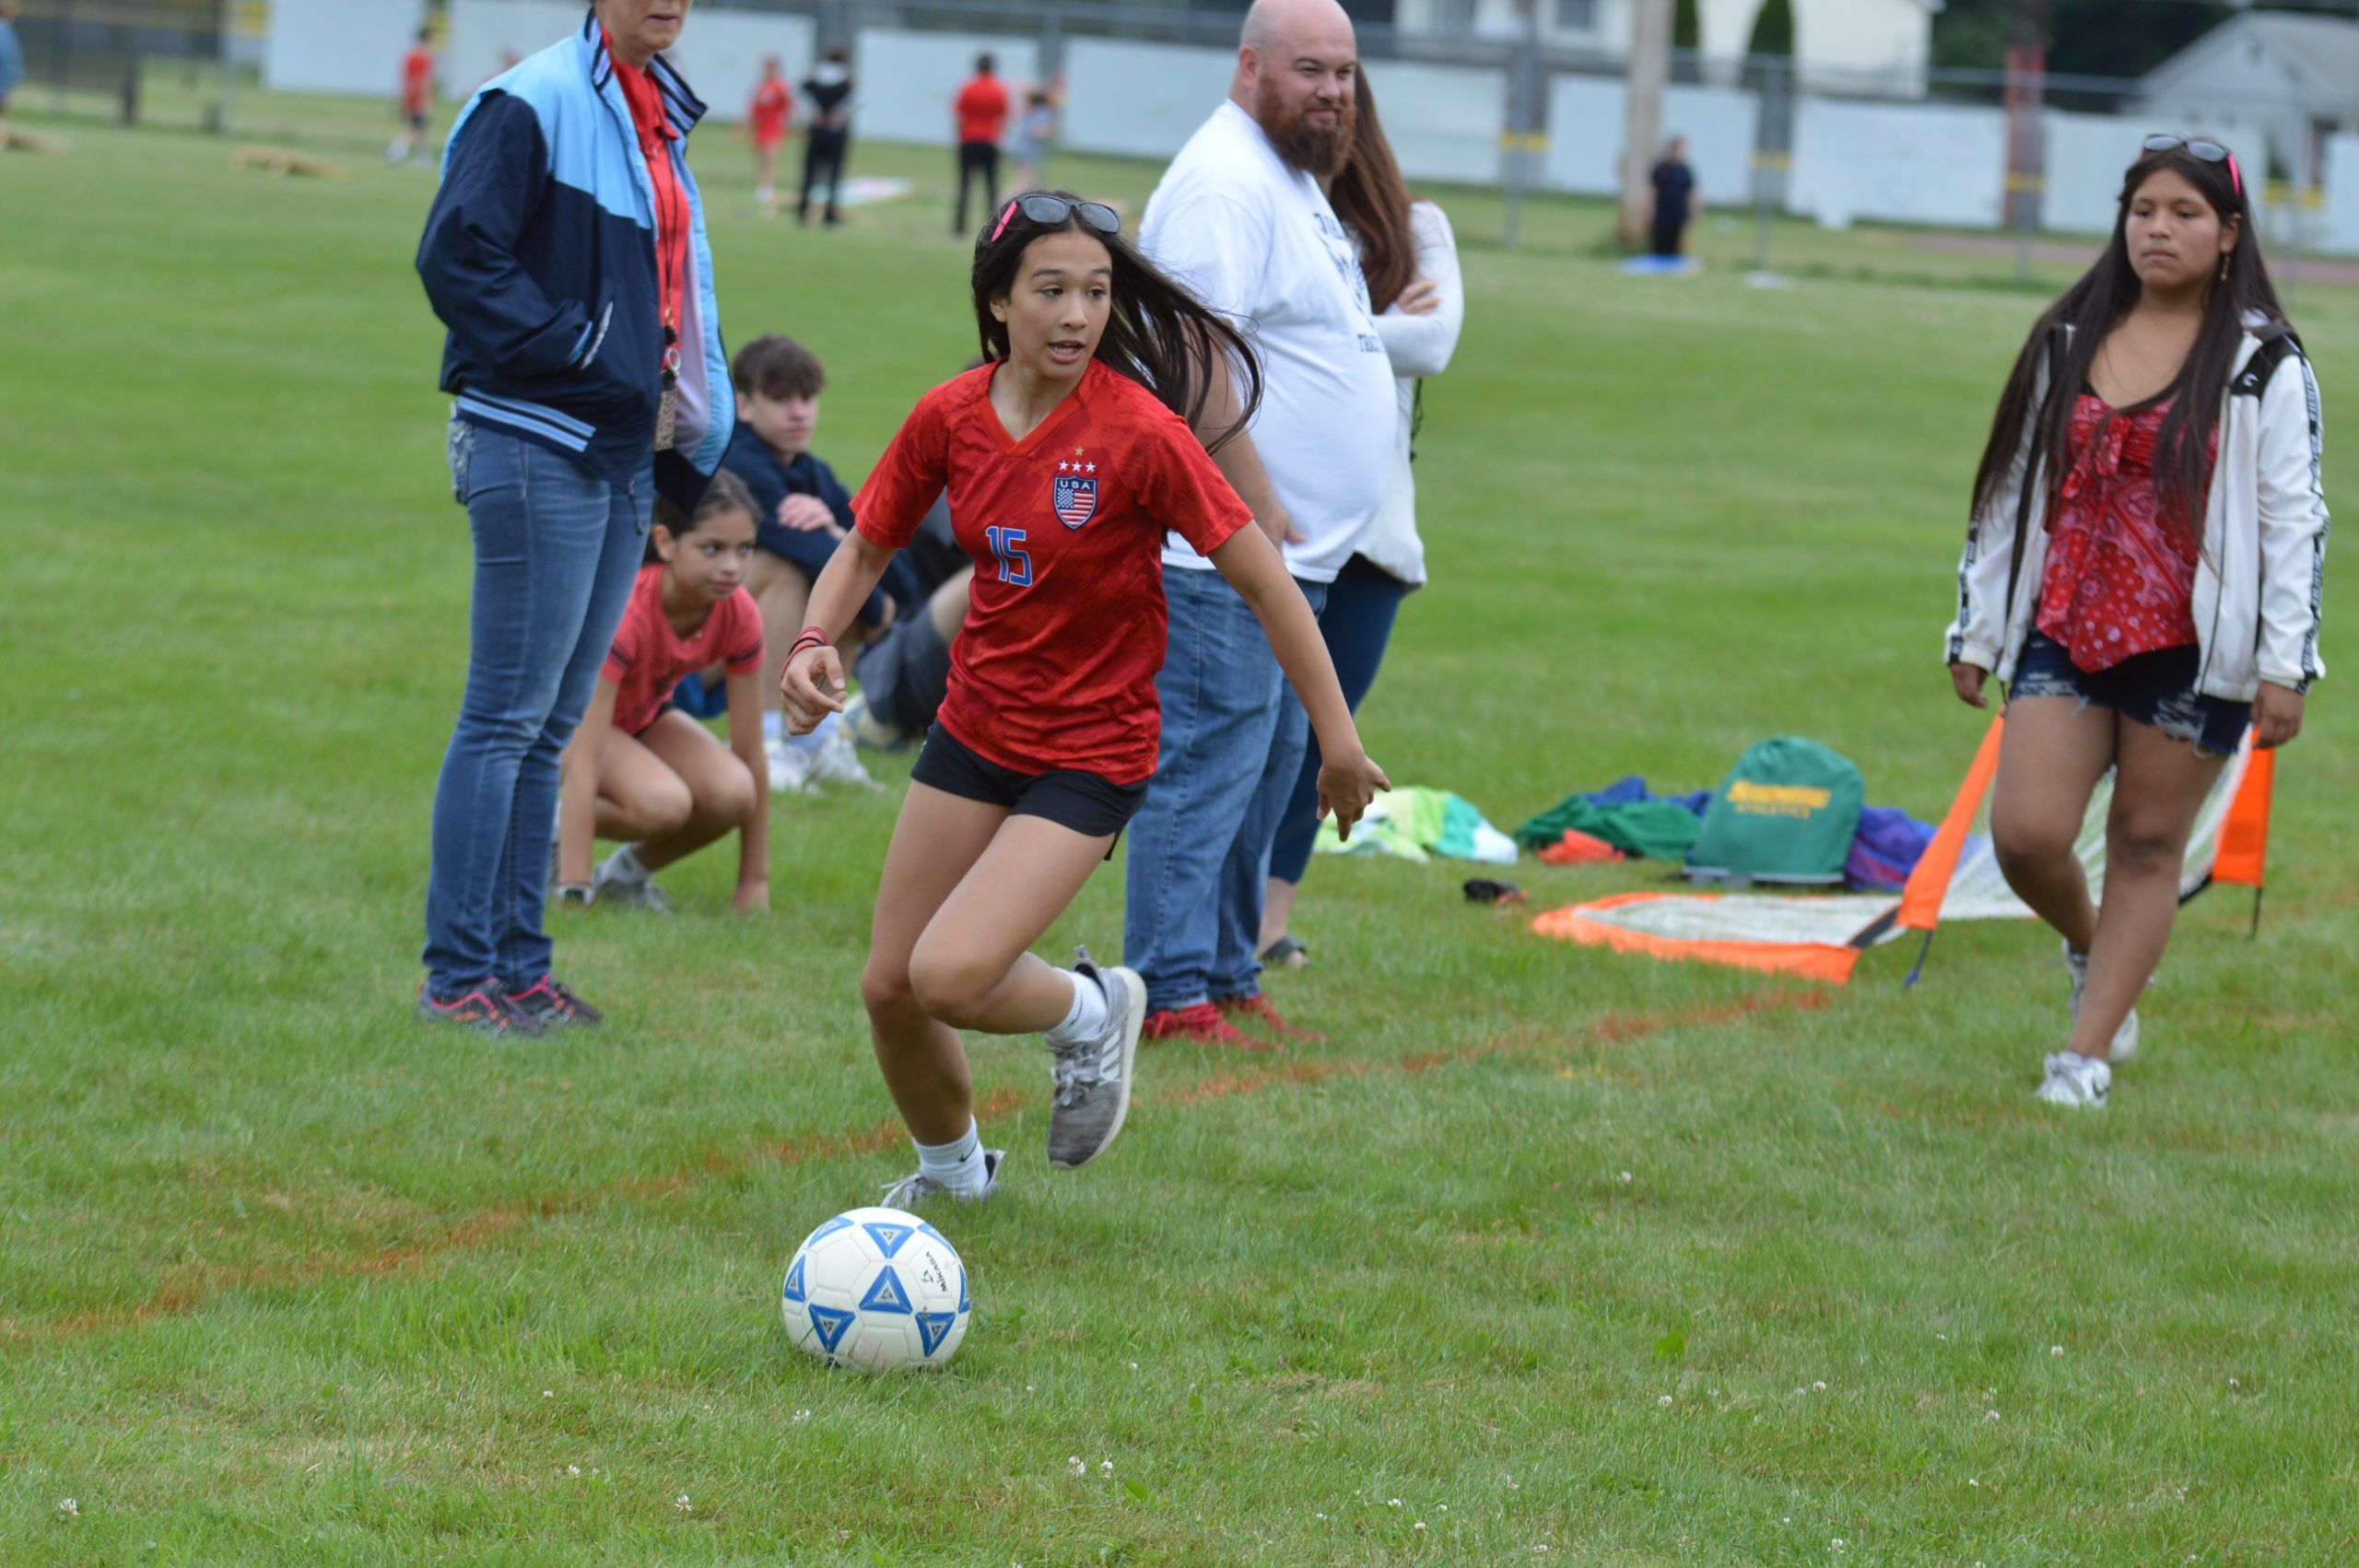 Students playing soccer at Goff Field Day